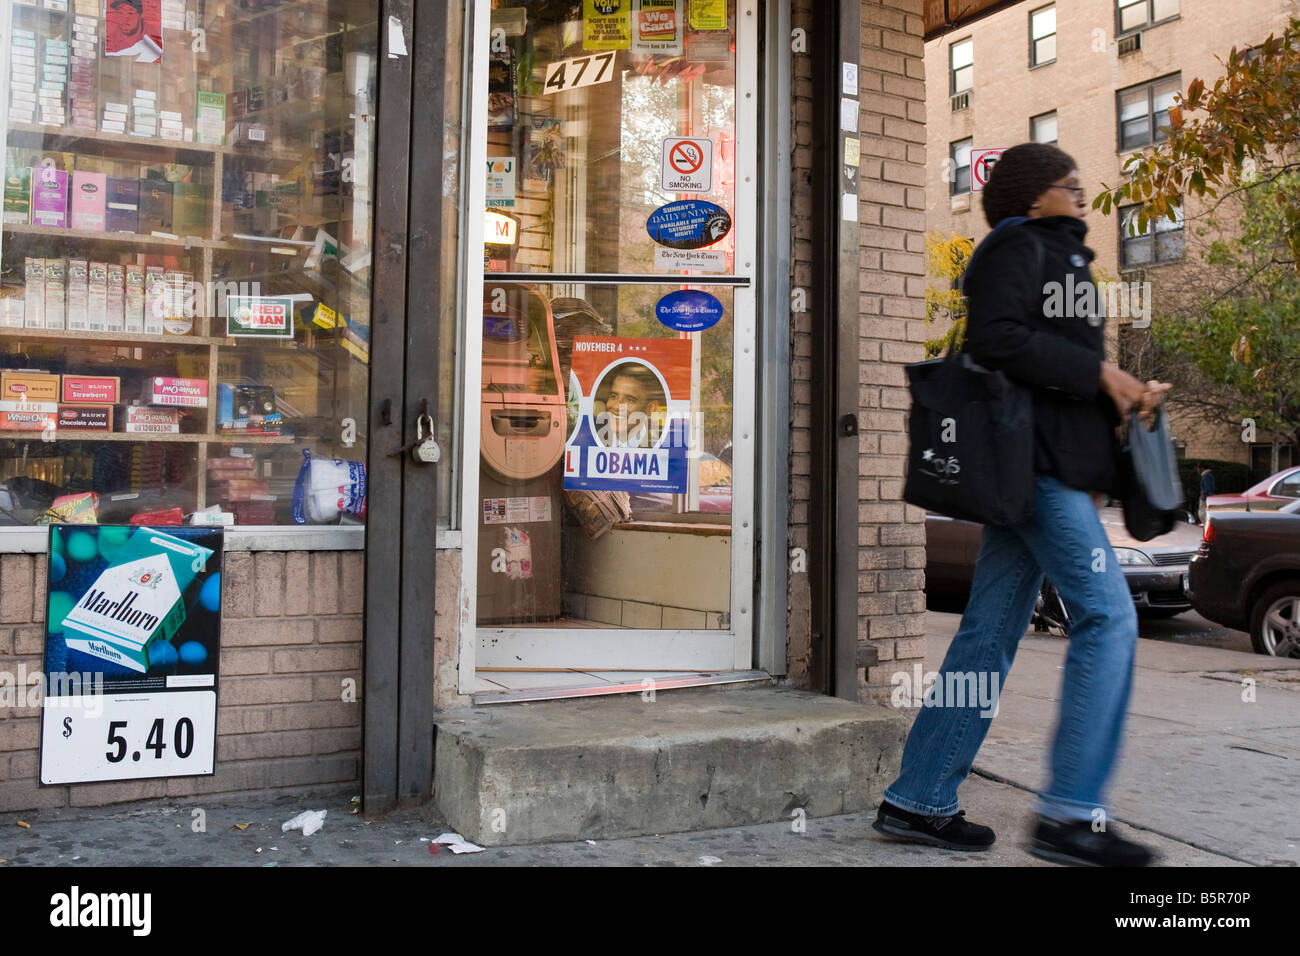 Obama sign in a store window in Harlem, Manhattan, New York City, USA Stock Photo